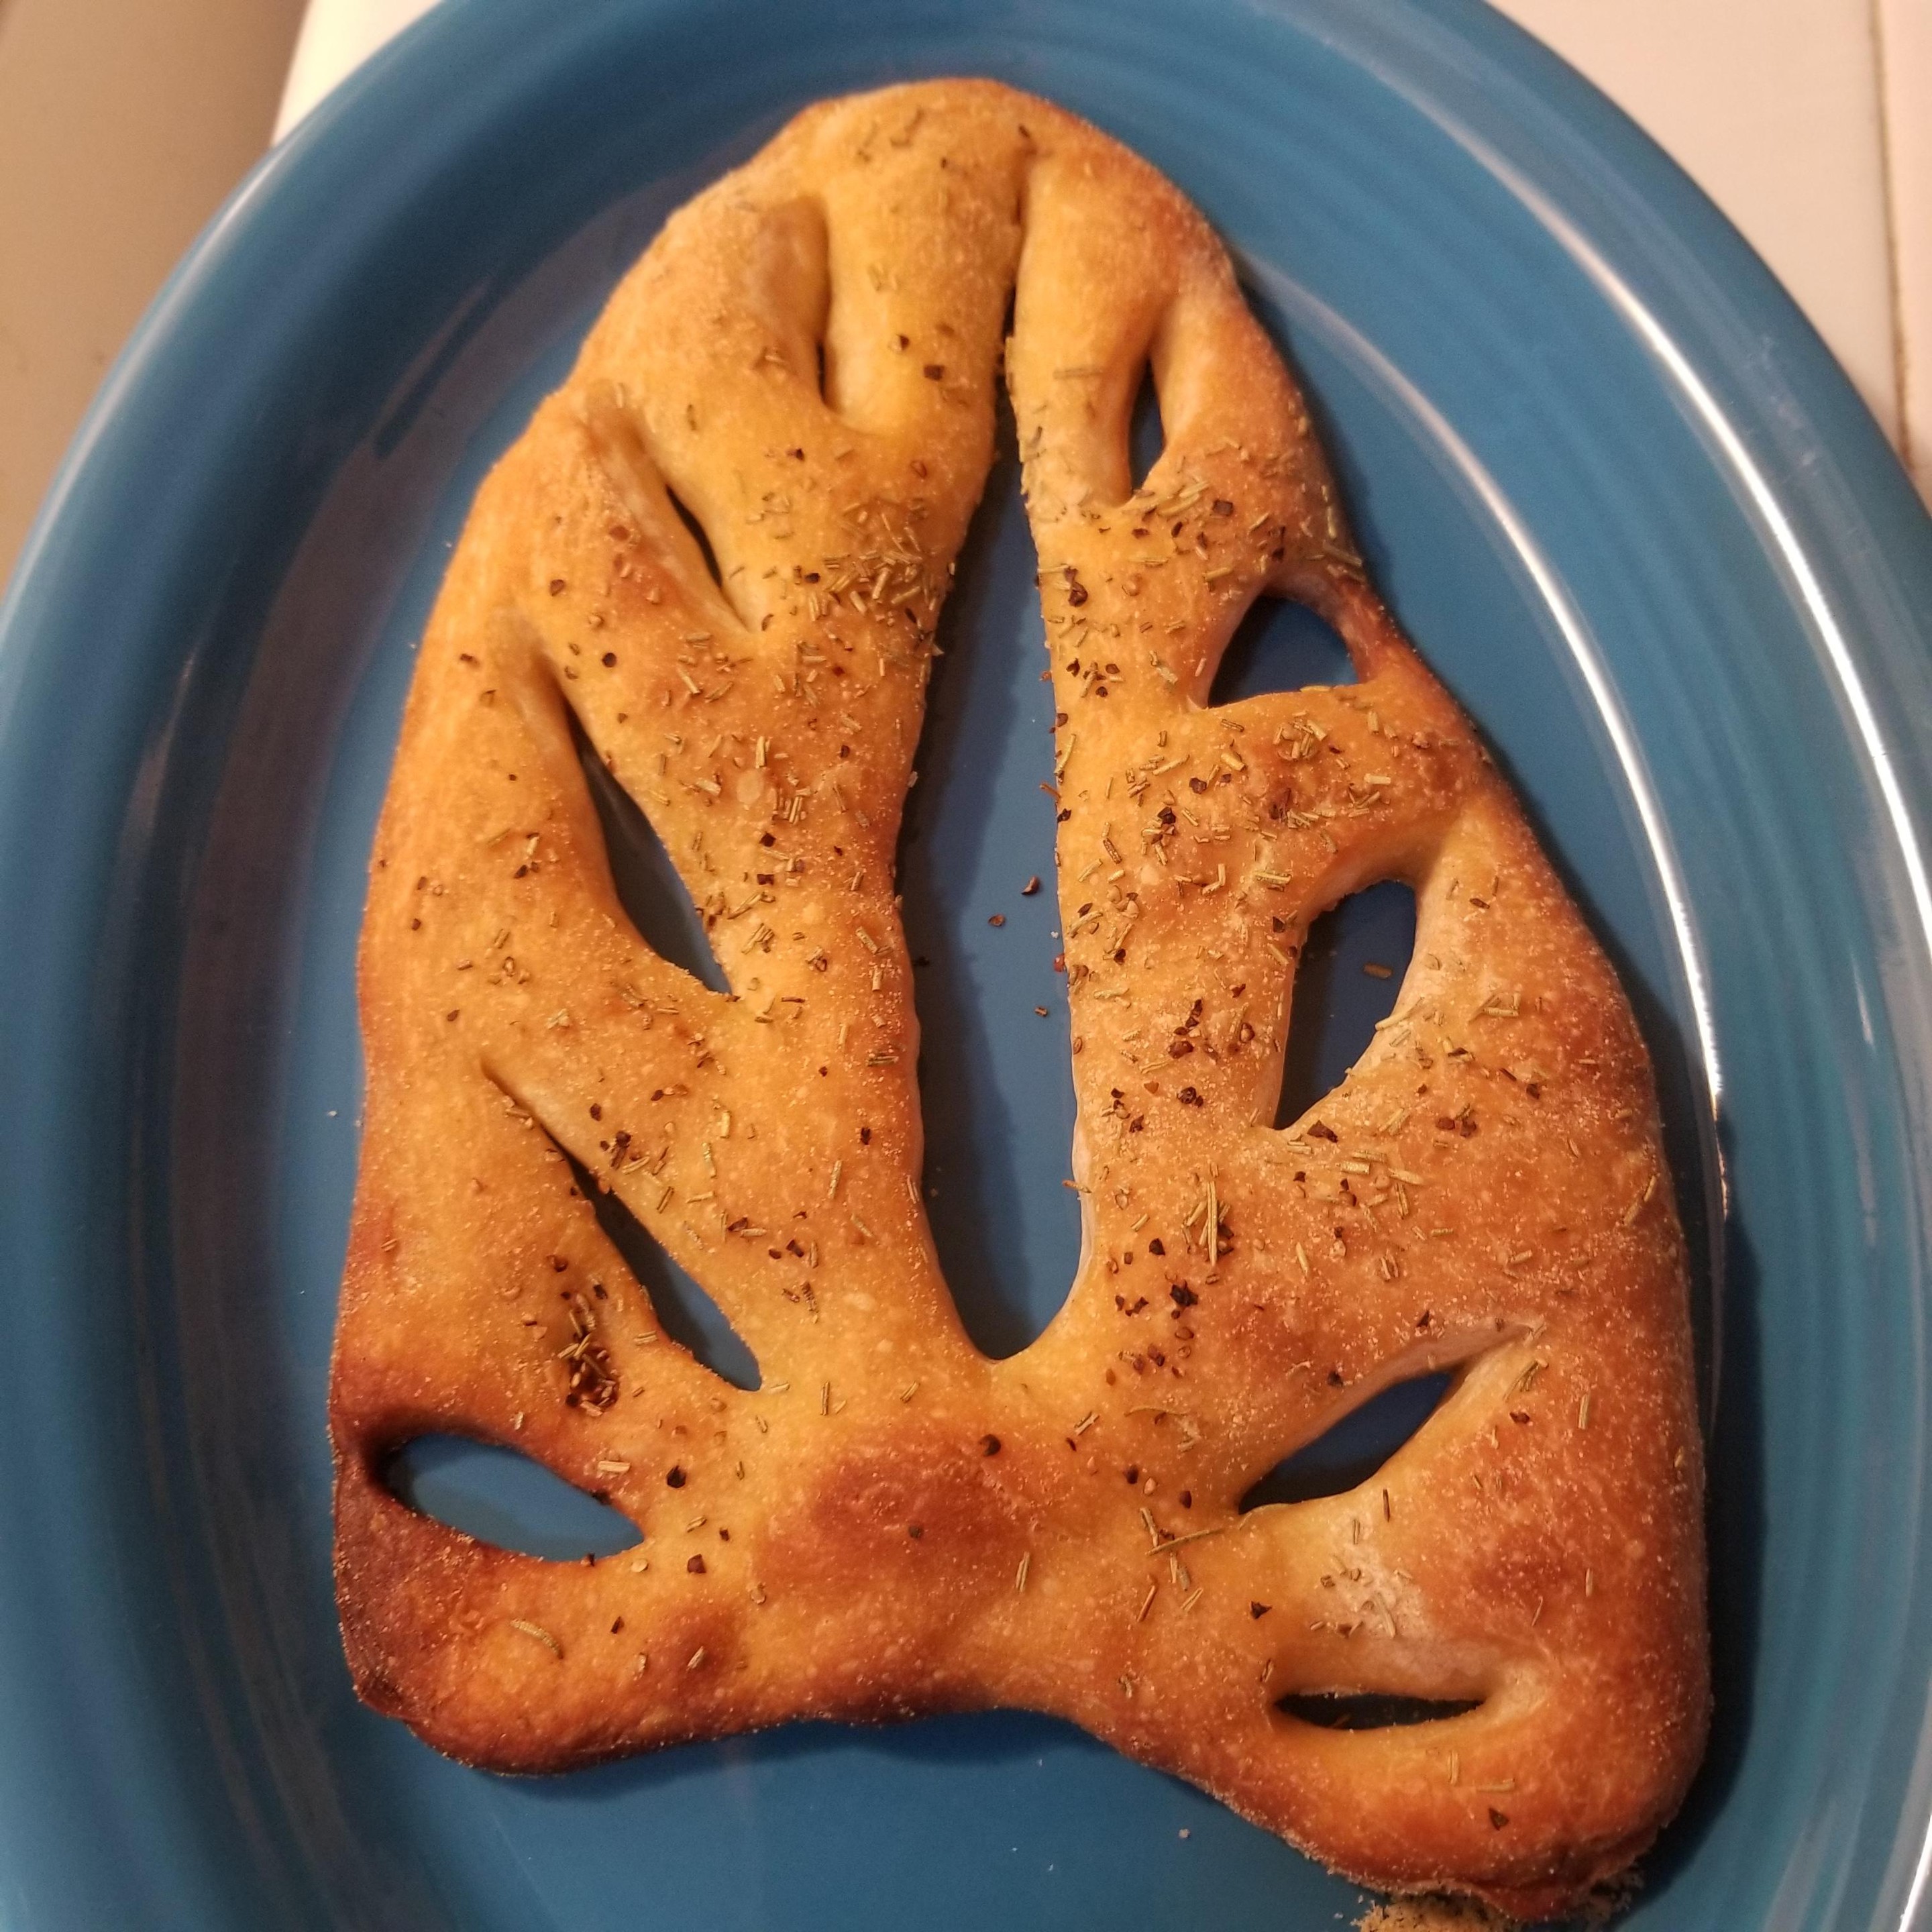 Photo of a delicious loaf of fougasse, baked to a golden brown & topped with dried herbs on a blue plate.